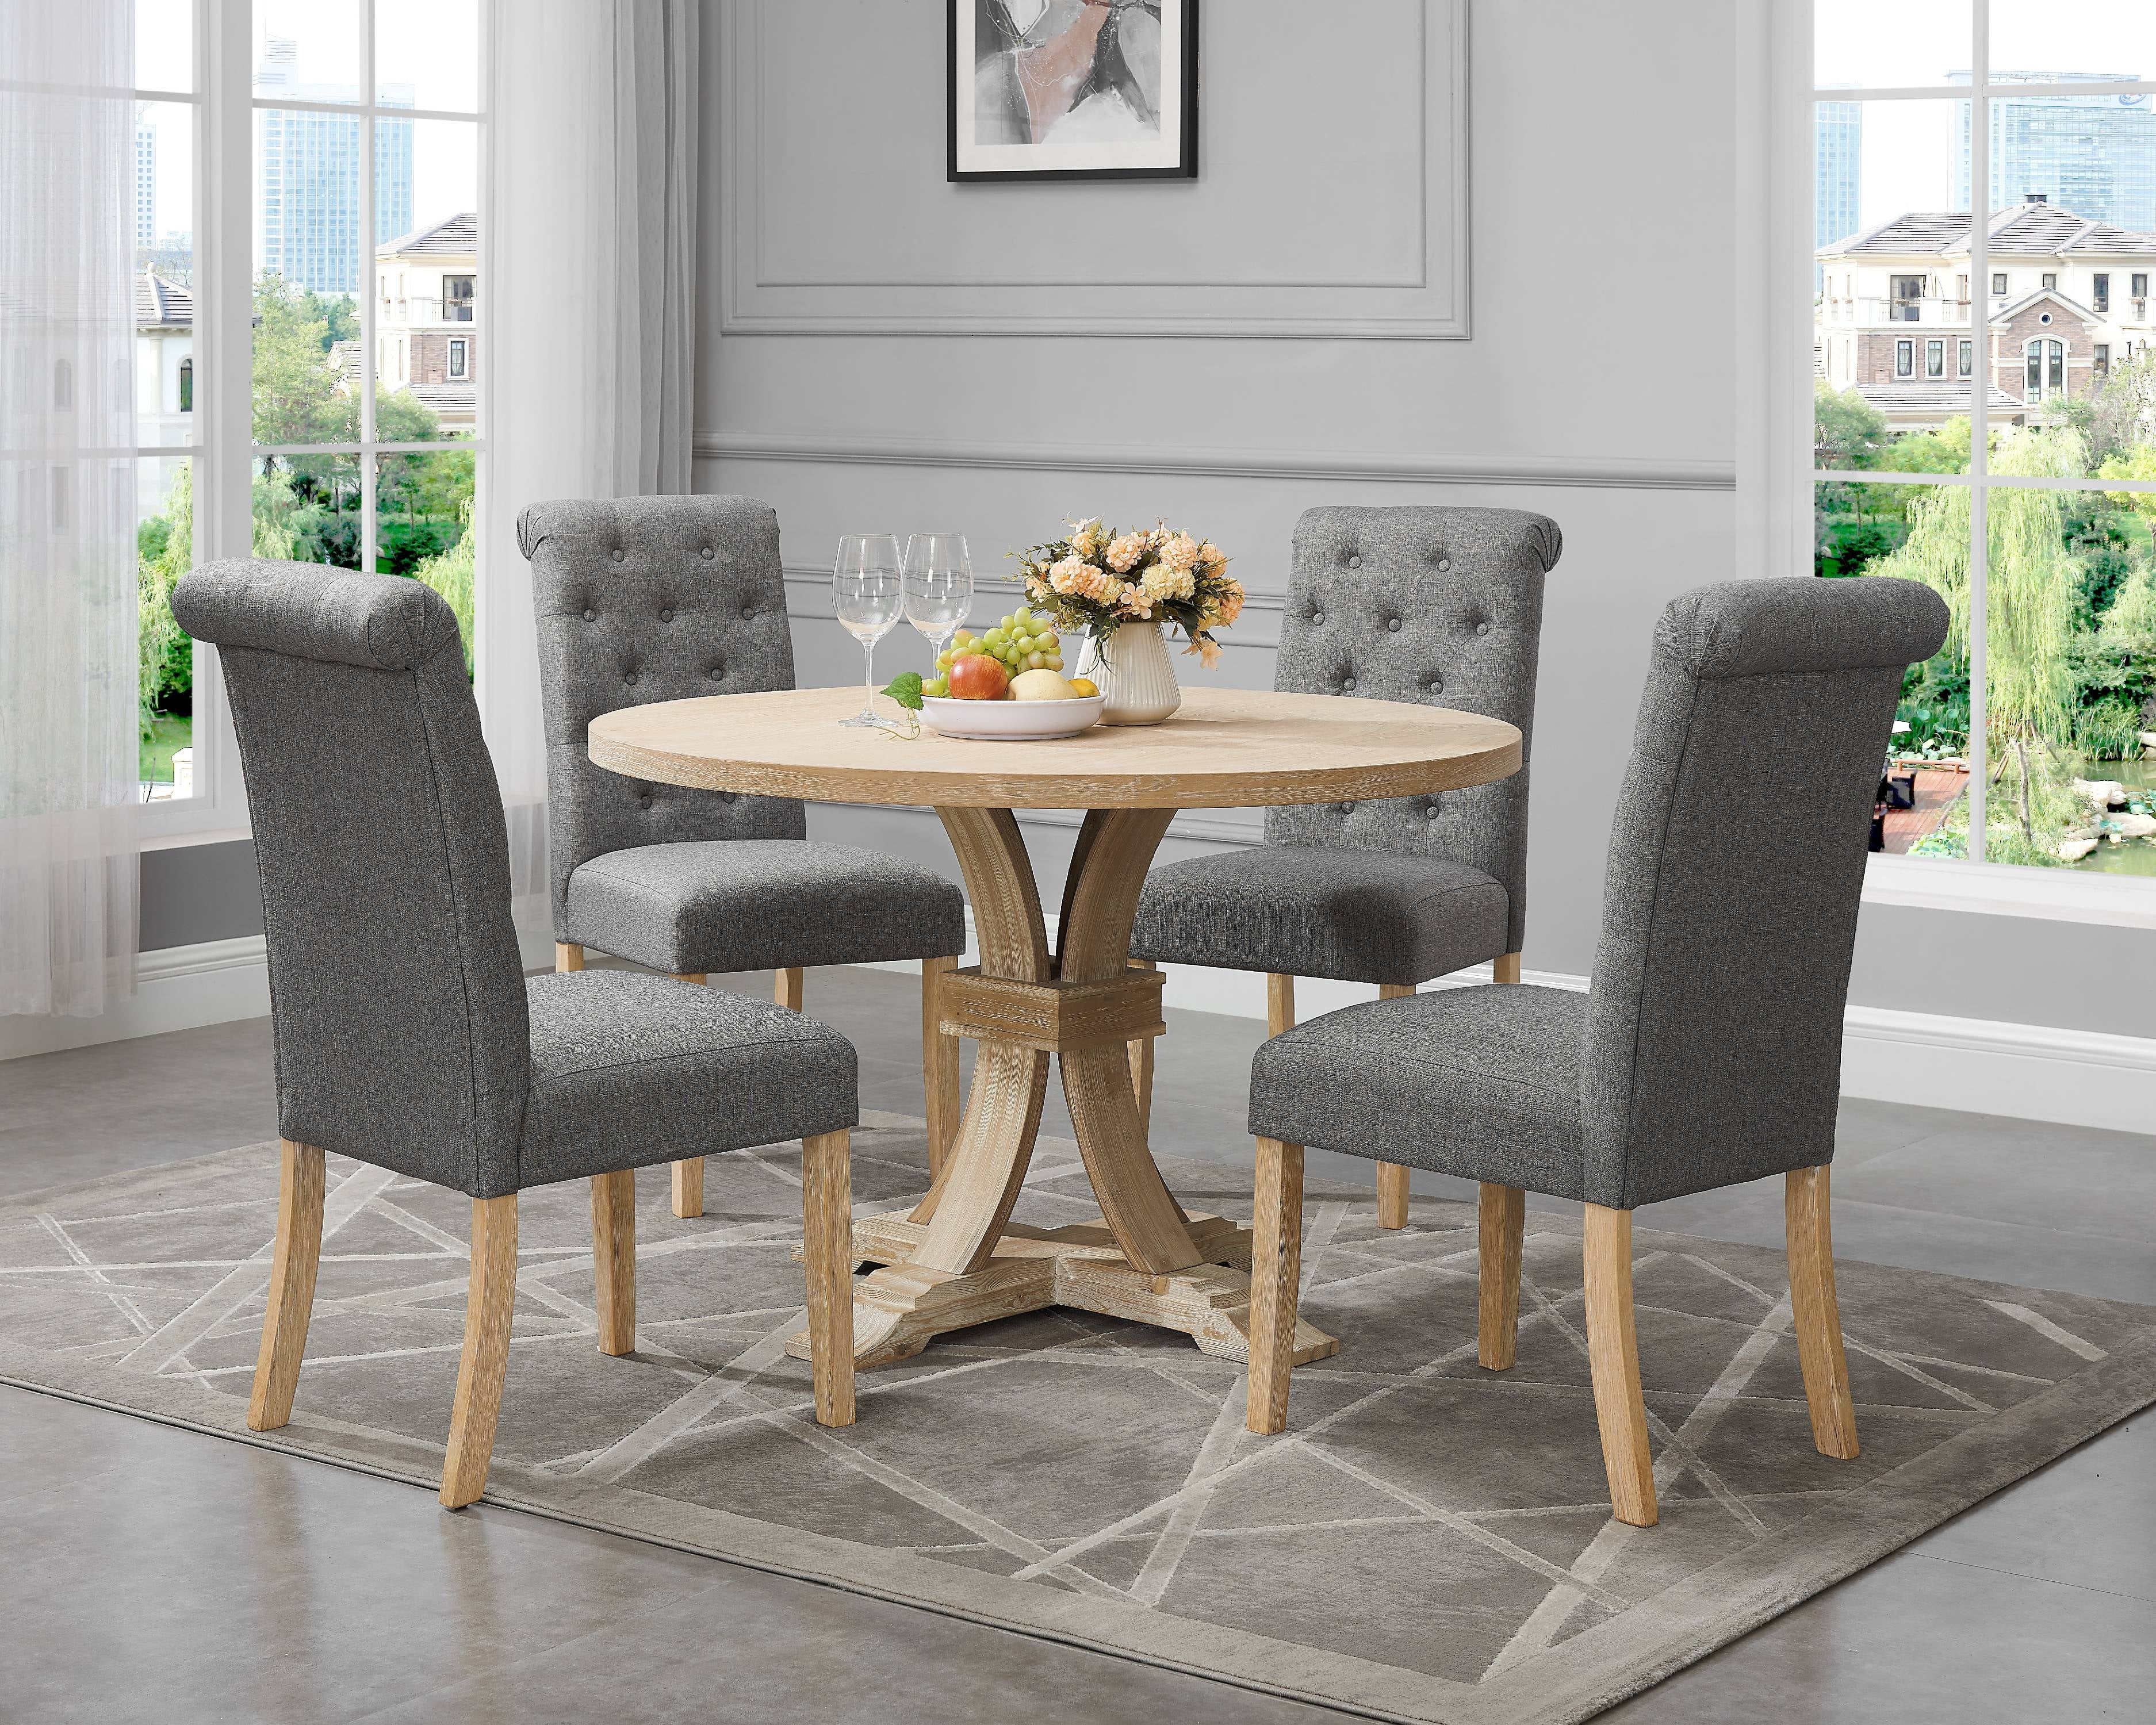 Siena White-washed Finished 5-Piece Dining set, Pedestal Round Table